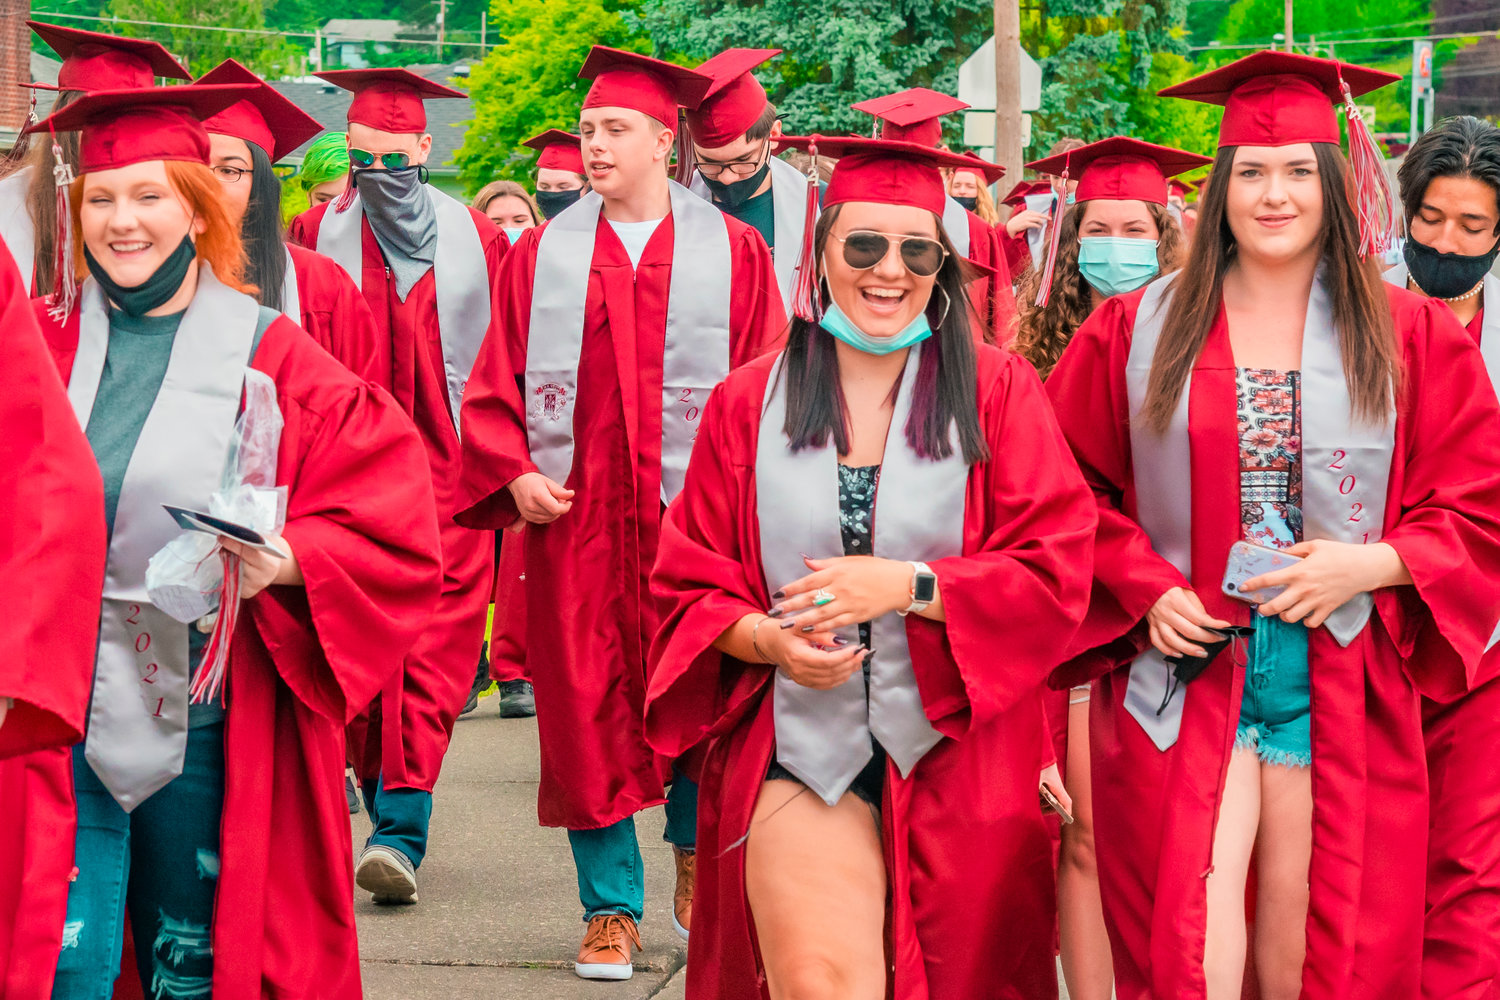 On Thursday morning, W.F. West seniors participated in the Senior Walk from W.F. West to Chehalis Middle School, James W. Lintott Elementary and Orin C Smith Elementary.